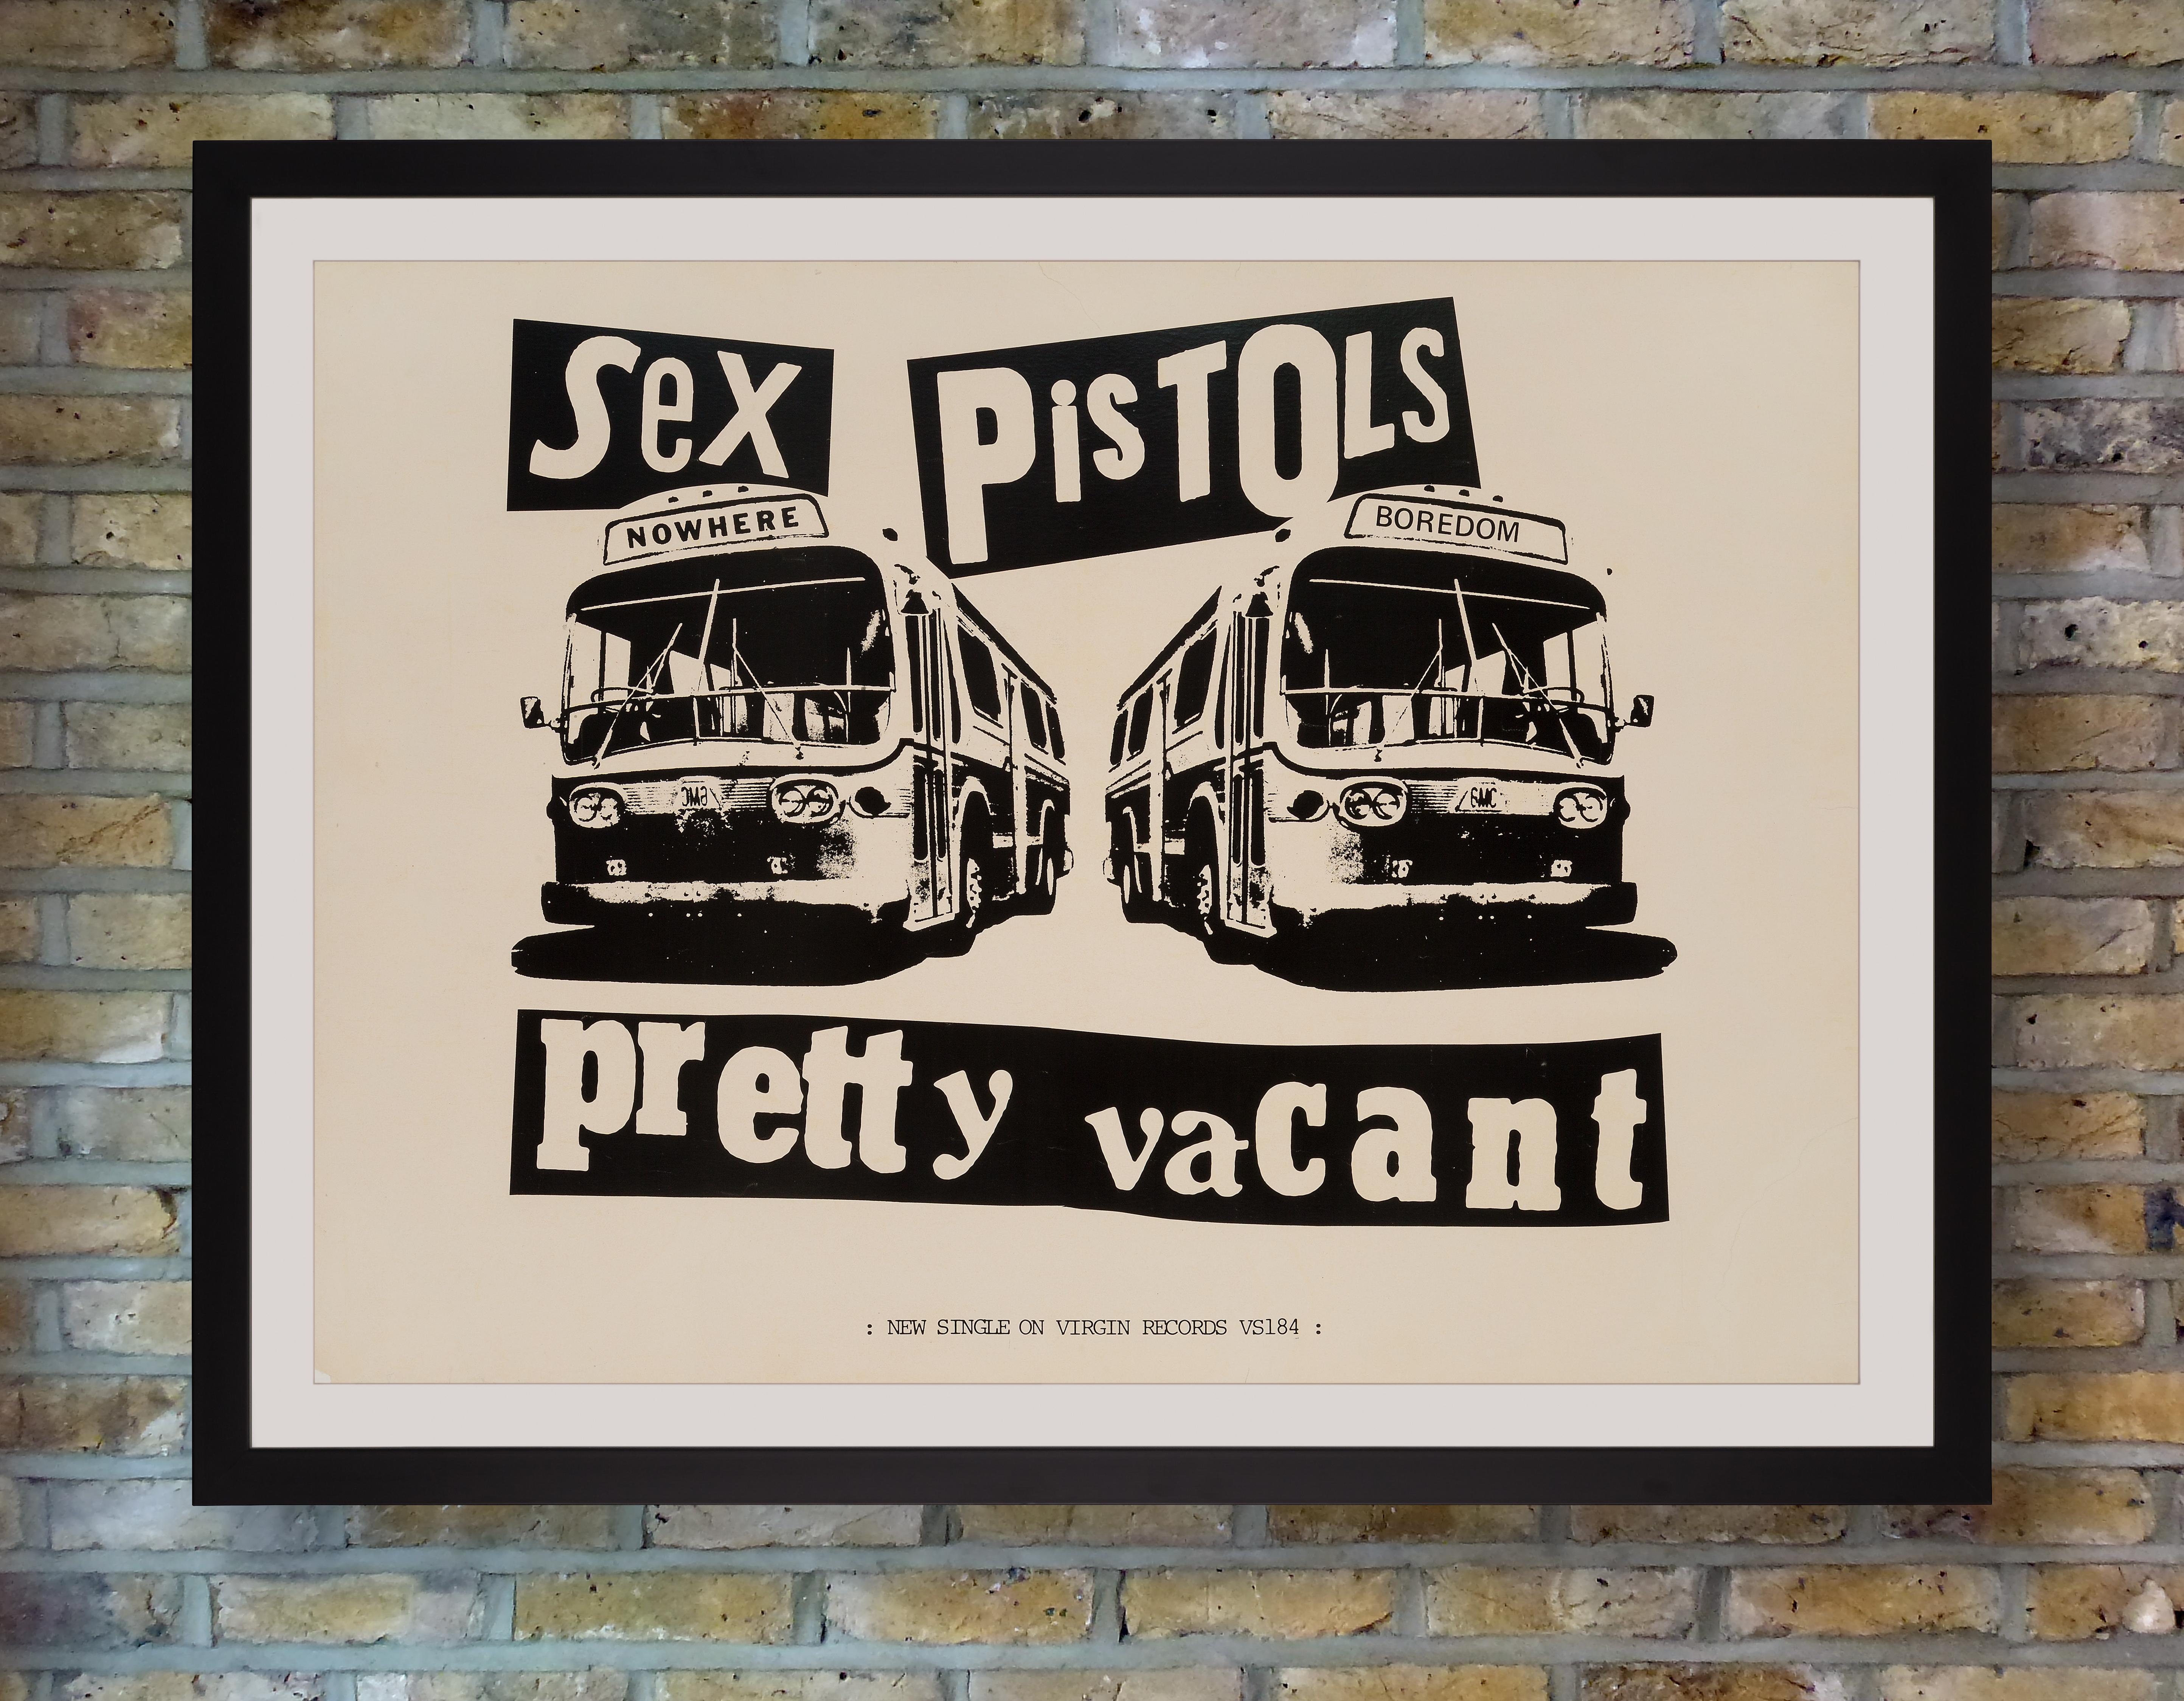 A scarce promotional poster issued by Virgin Records in support of the Sex Pistols third single Pretty Vacant, released in July 1977 from their only studio album Never Mind The Bollocks: Here's The Sex Pistols. British artist Jamie Reid has become